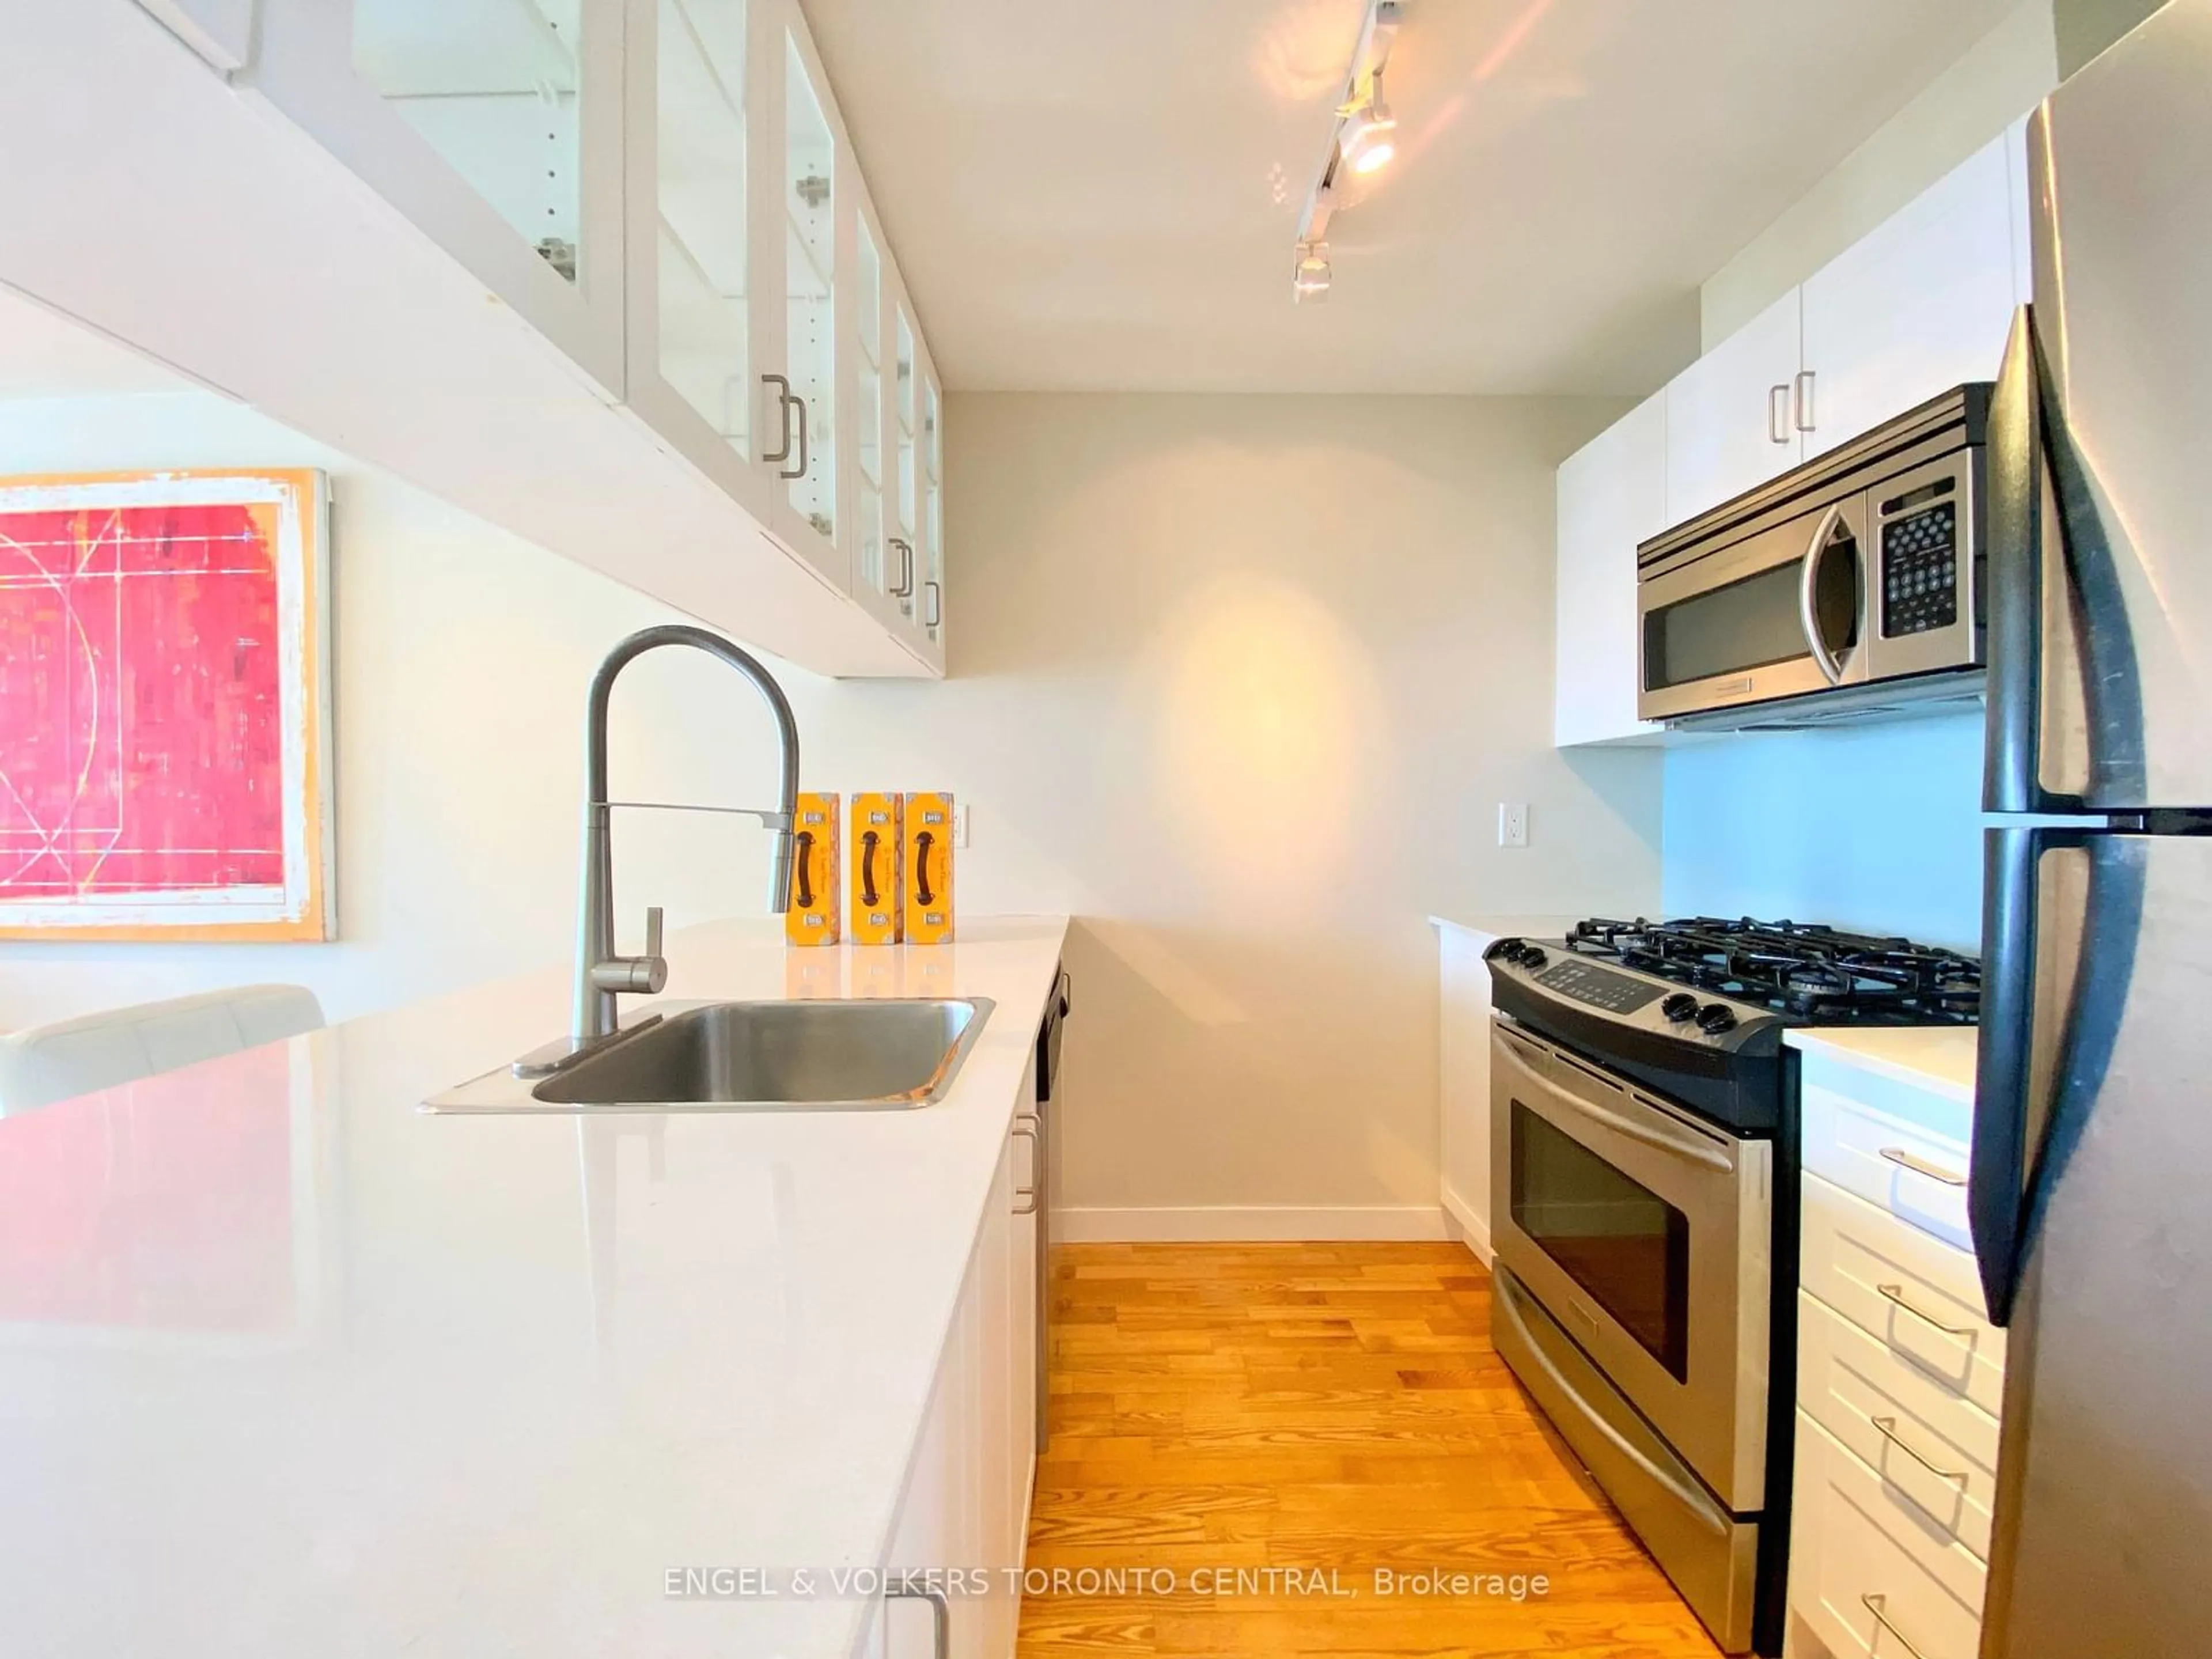 Standard kitchen for 281 Mutual St #2004, Toronto Ontario M4Y 3C4